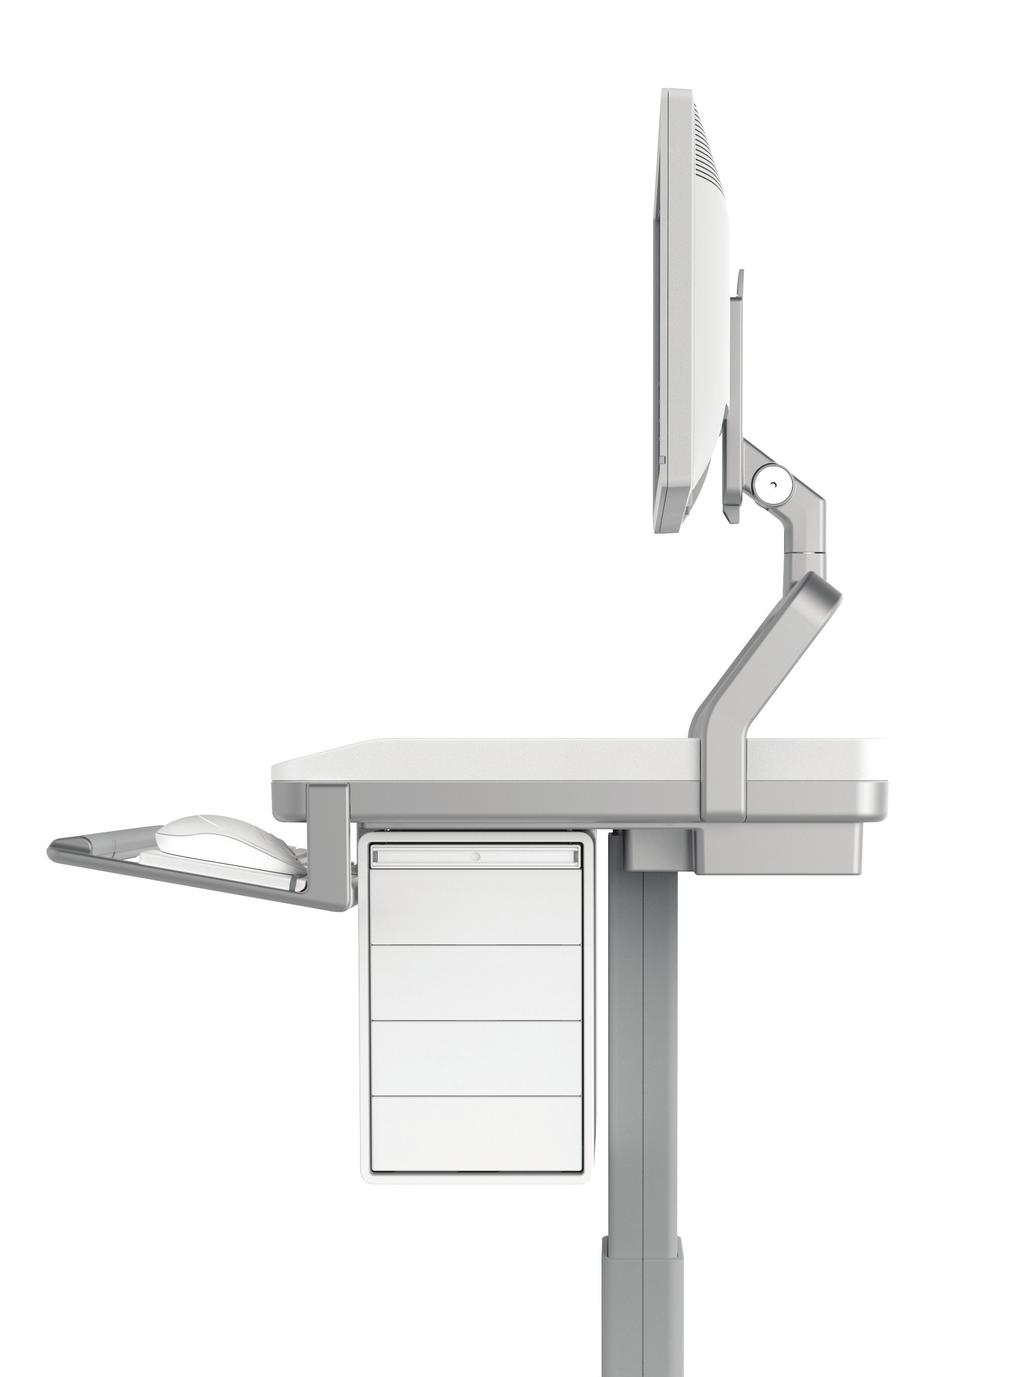 Ergonomic Expertise Ergonomics the study of how to improve efficiency and comfort in the workplace has been Humanscale s core competency for more than 30 years.